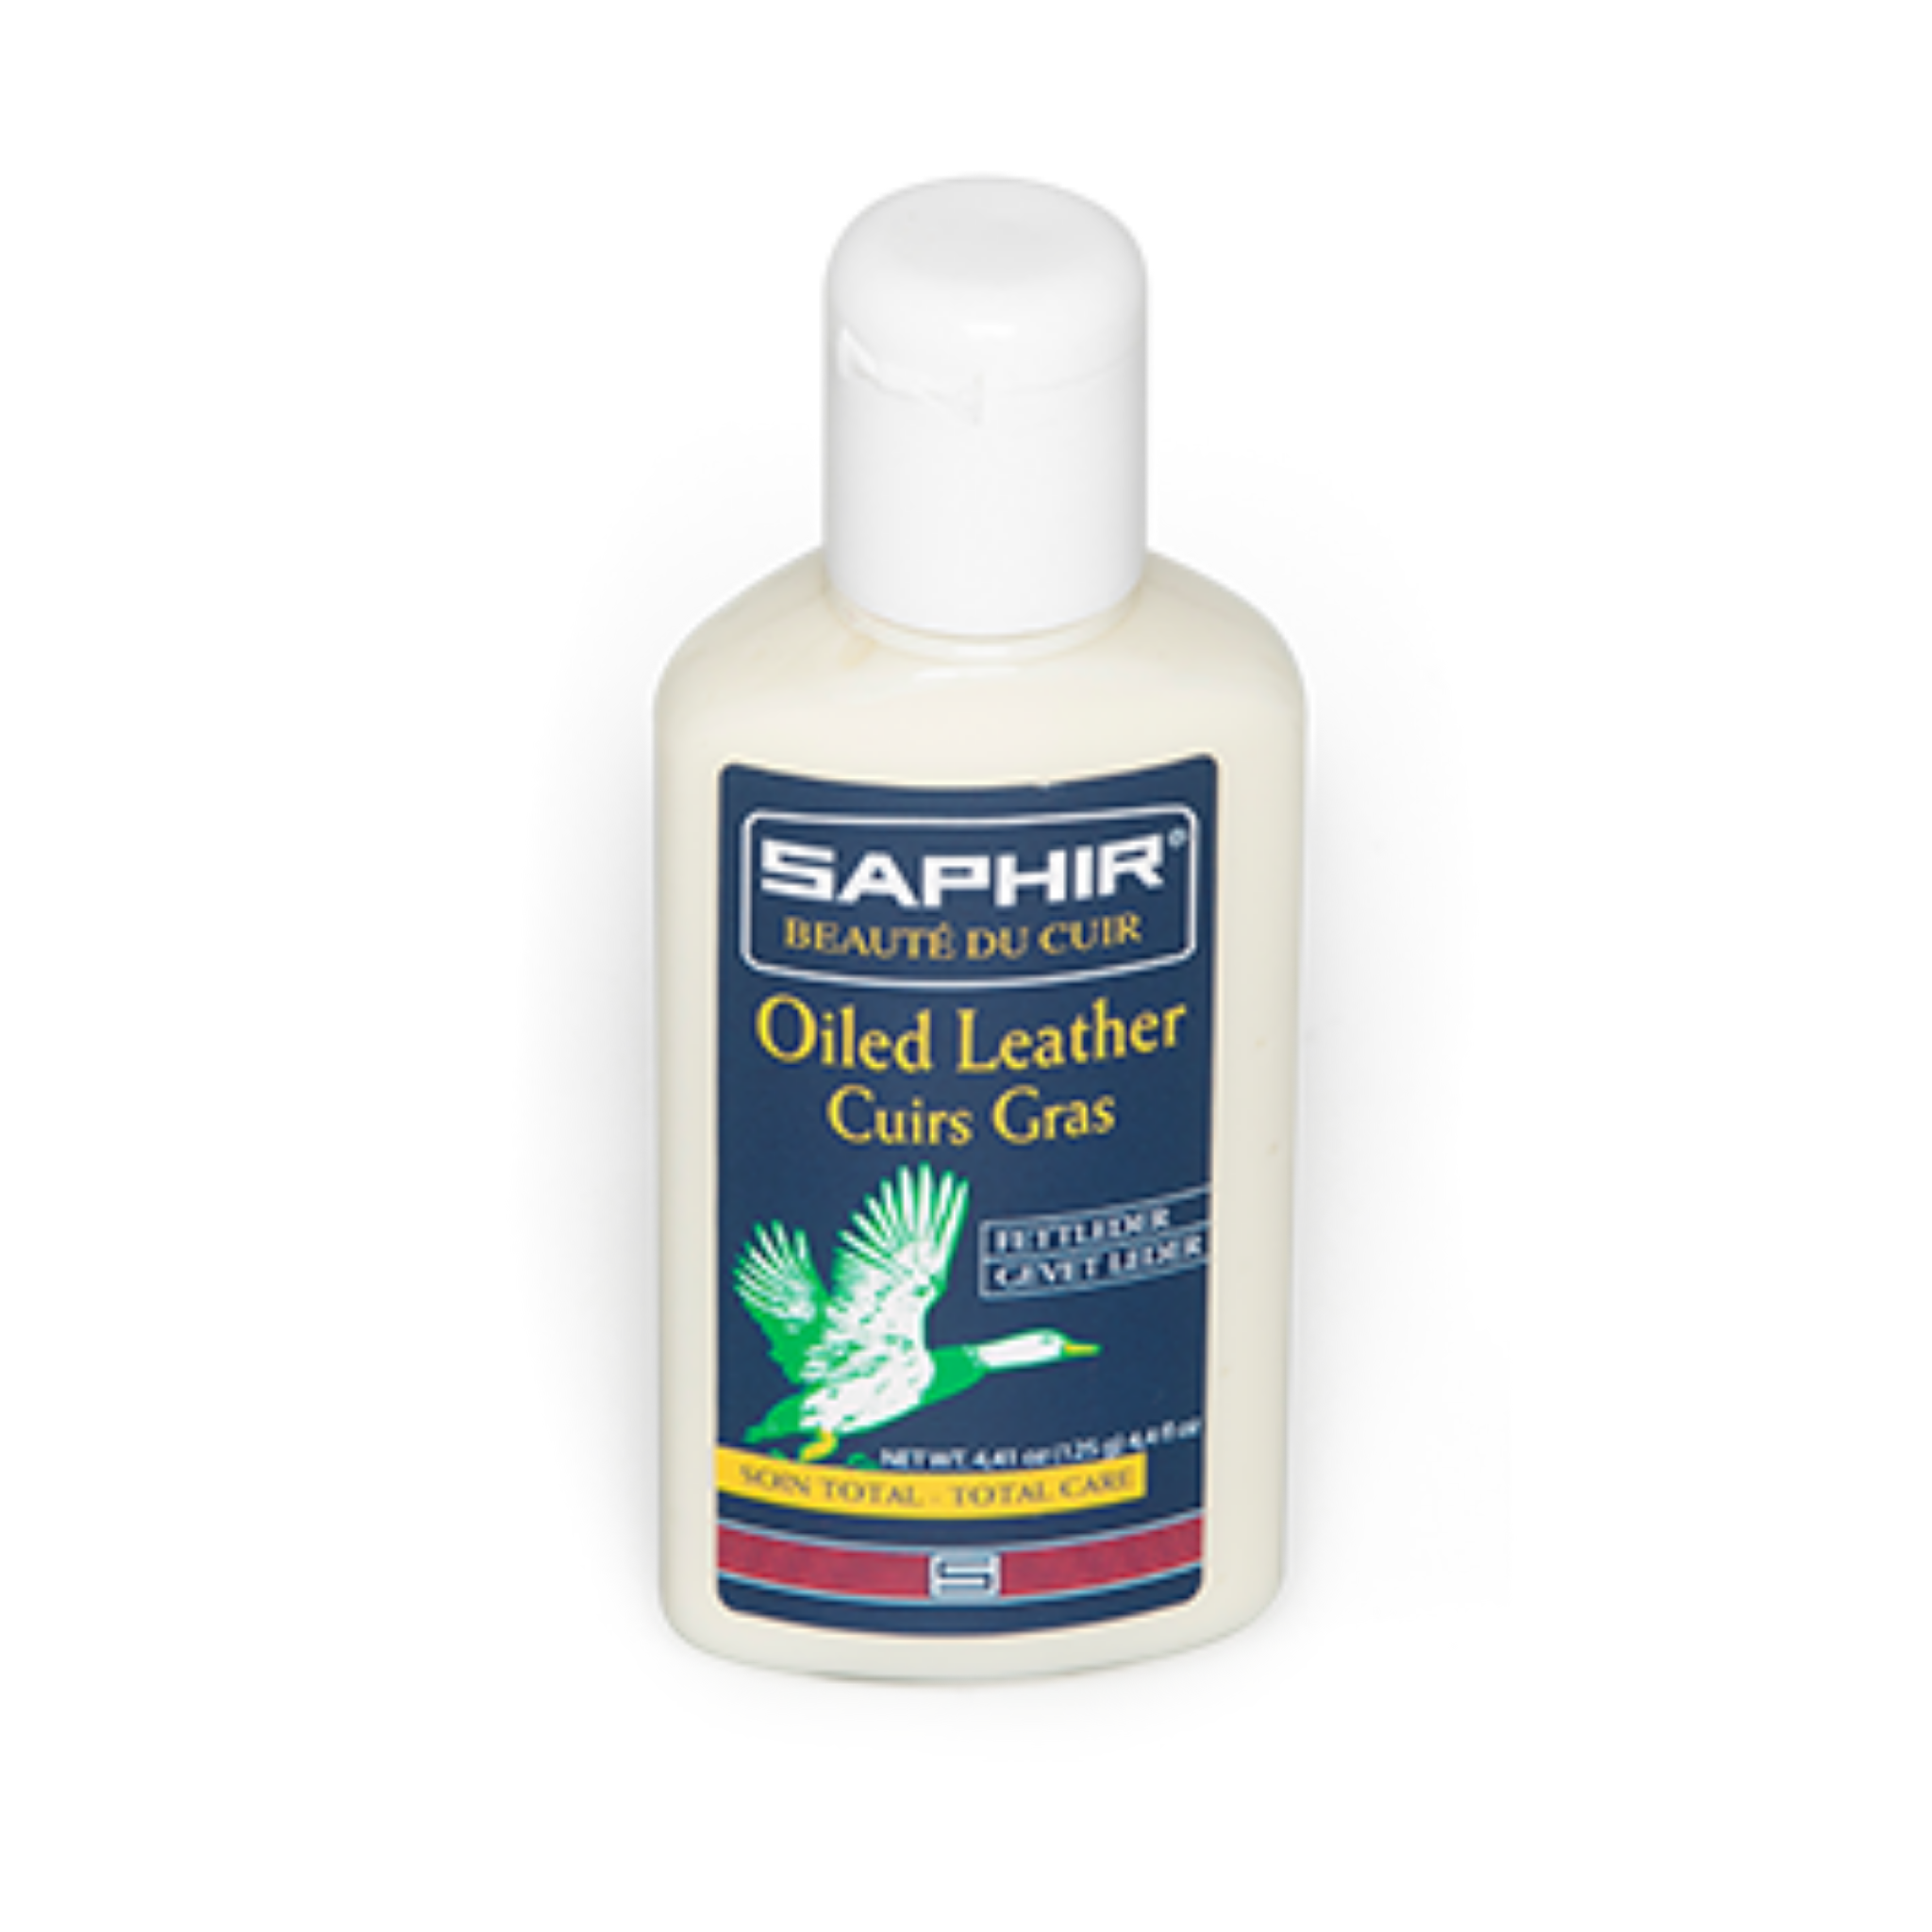  Saphir Oiled Leather Cream for cromexcel (or oiled) leather. Stocked in Little Lusso Australia.